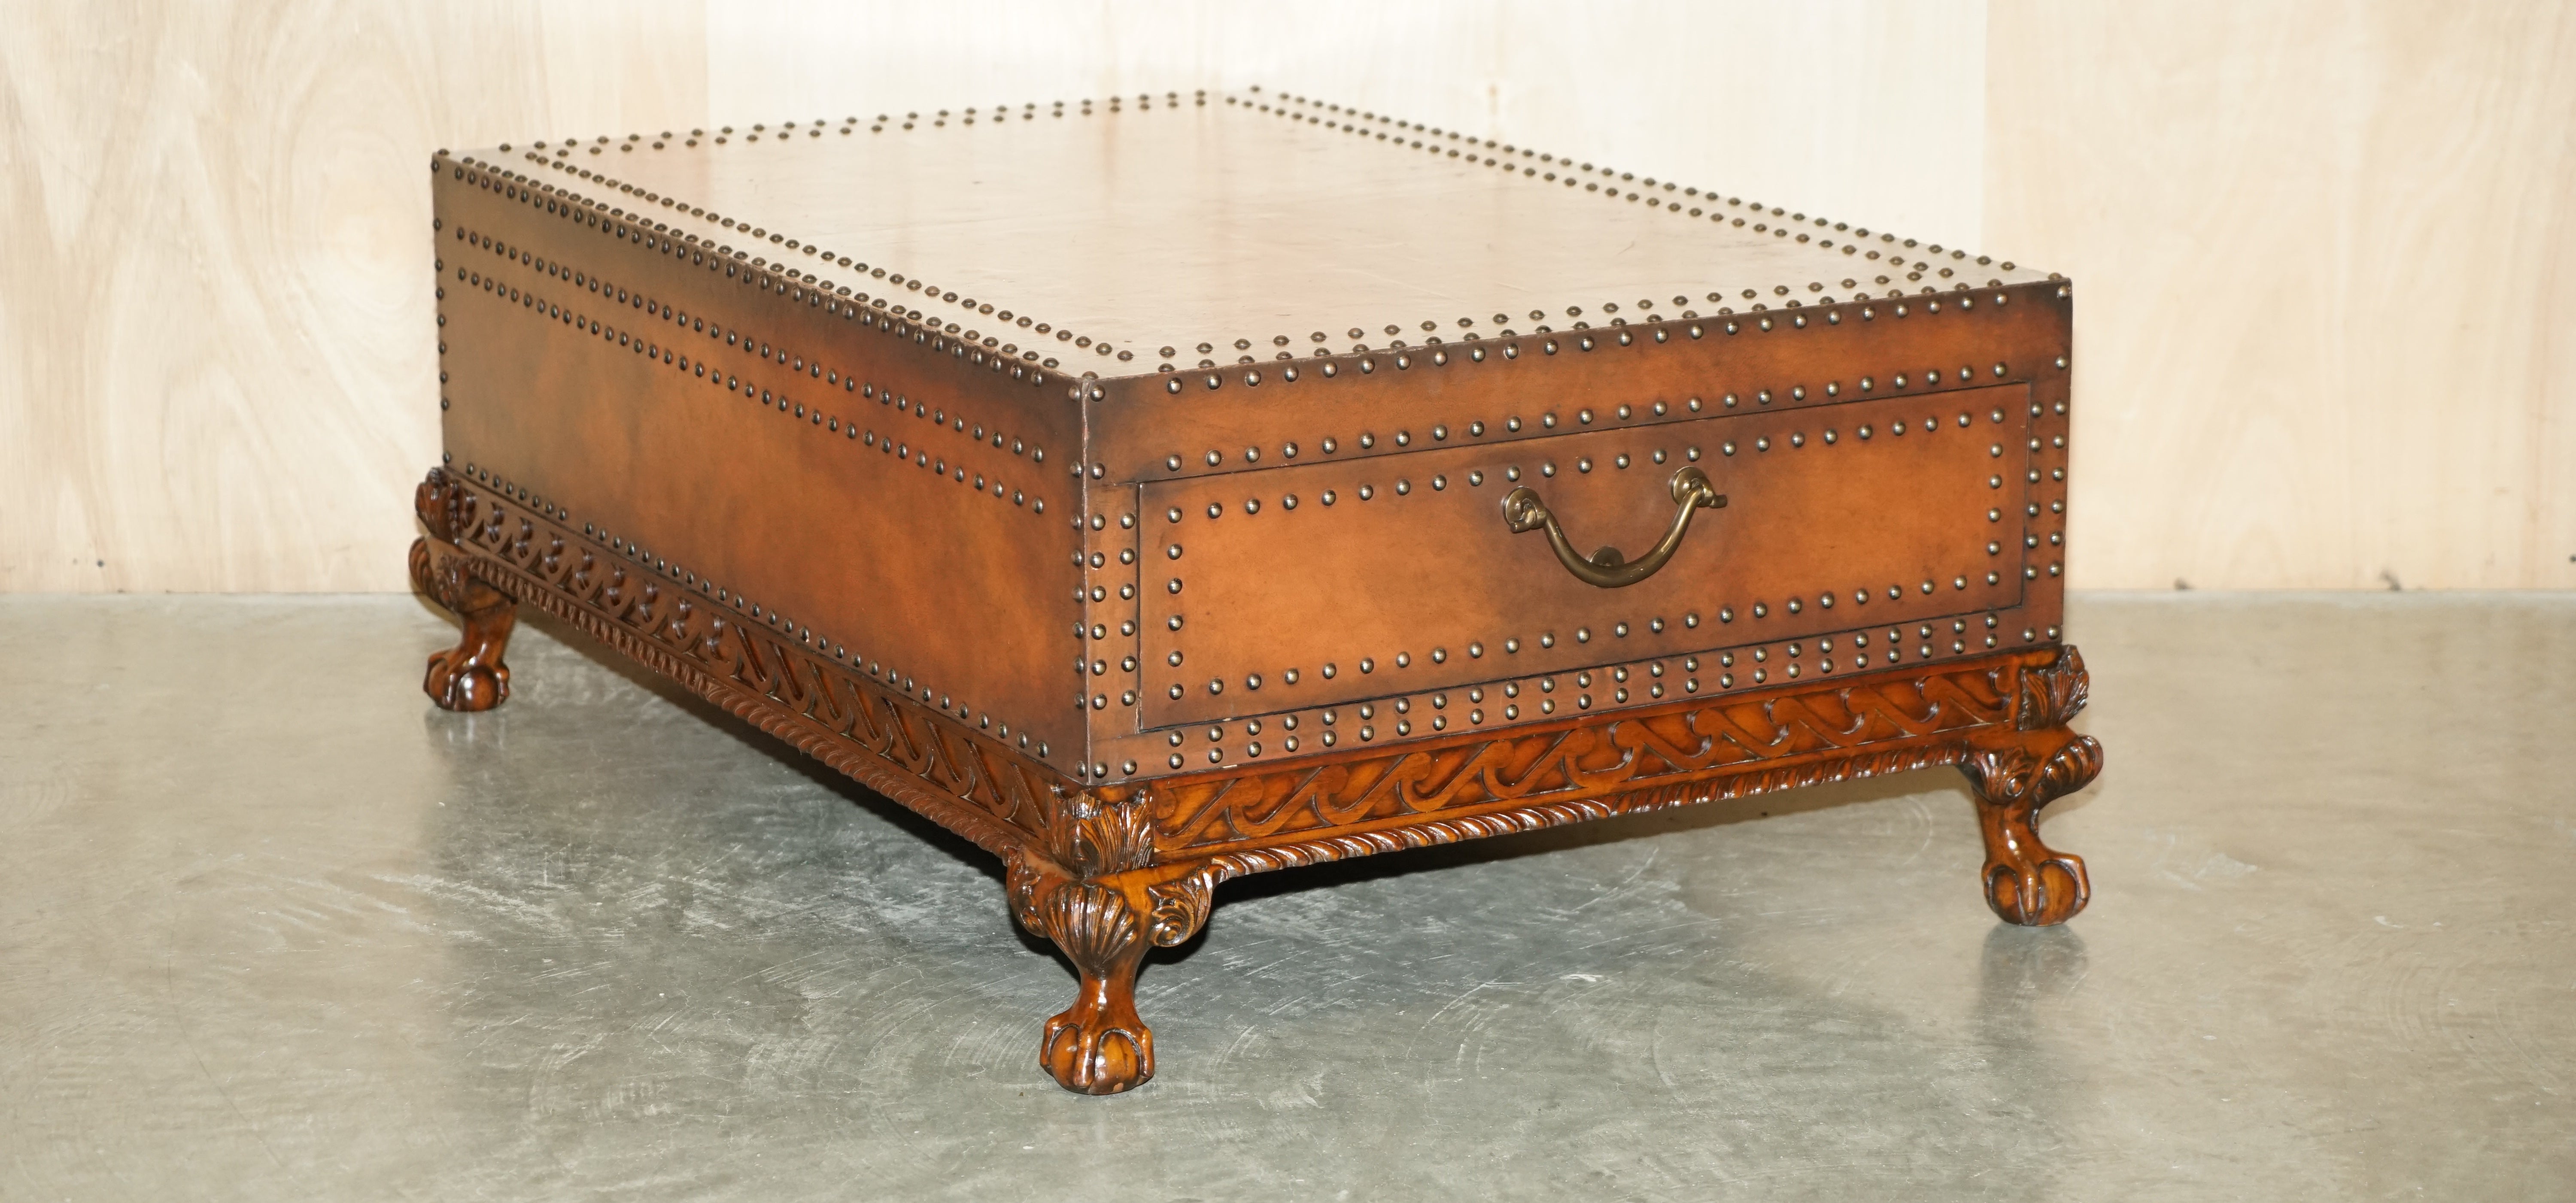 Royal House Antiques

Royal House Antiques is delighteds to offer this attractive Ralph Lauren, very large twin drawer coffee or cocktail table with oversized twin drawers

Please note the delivery fee listed is just a guide, it covers within the